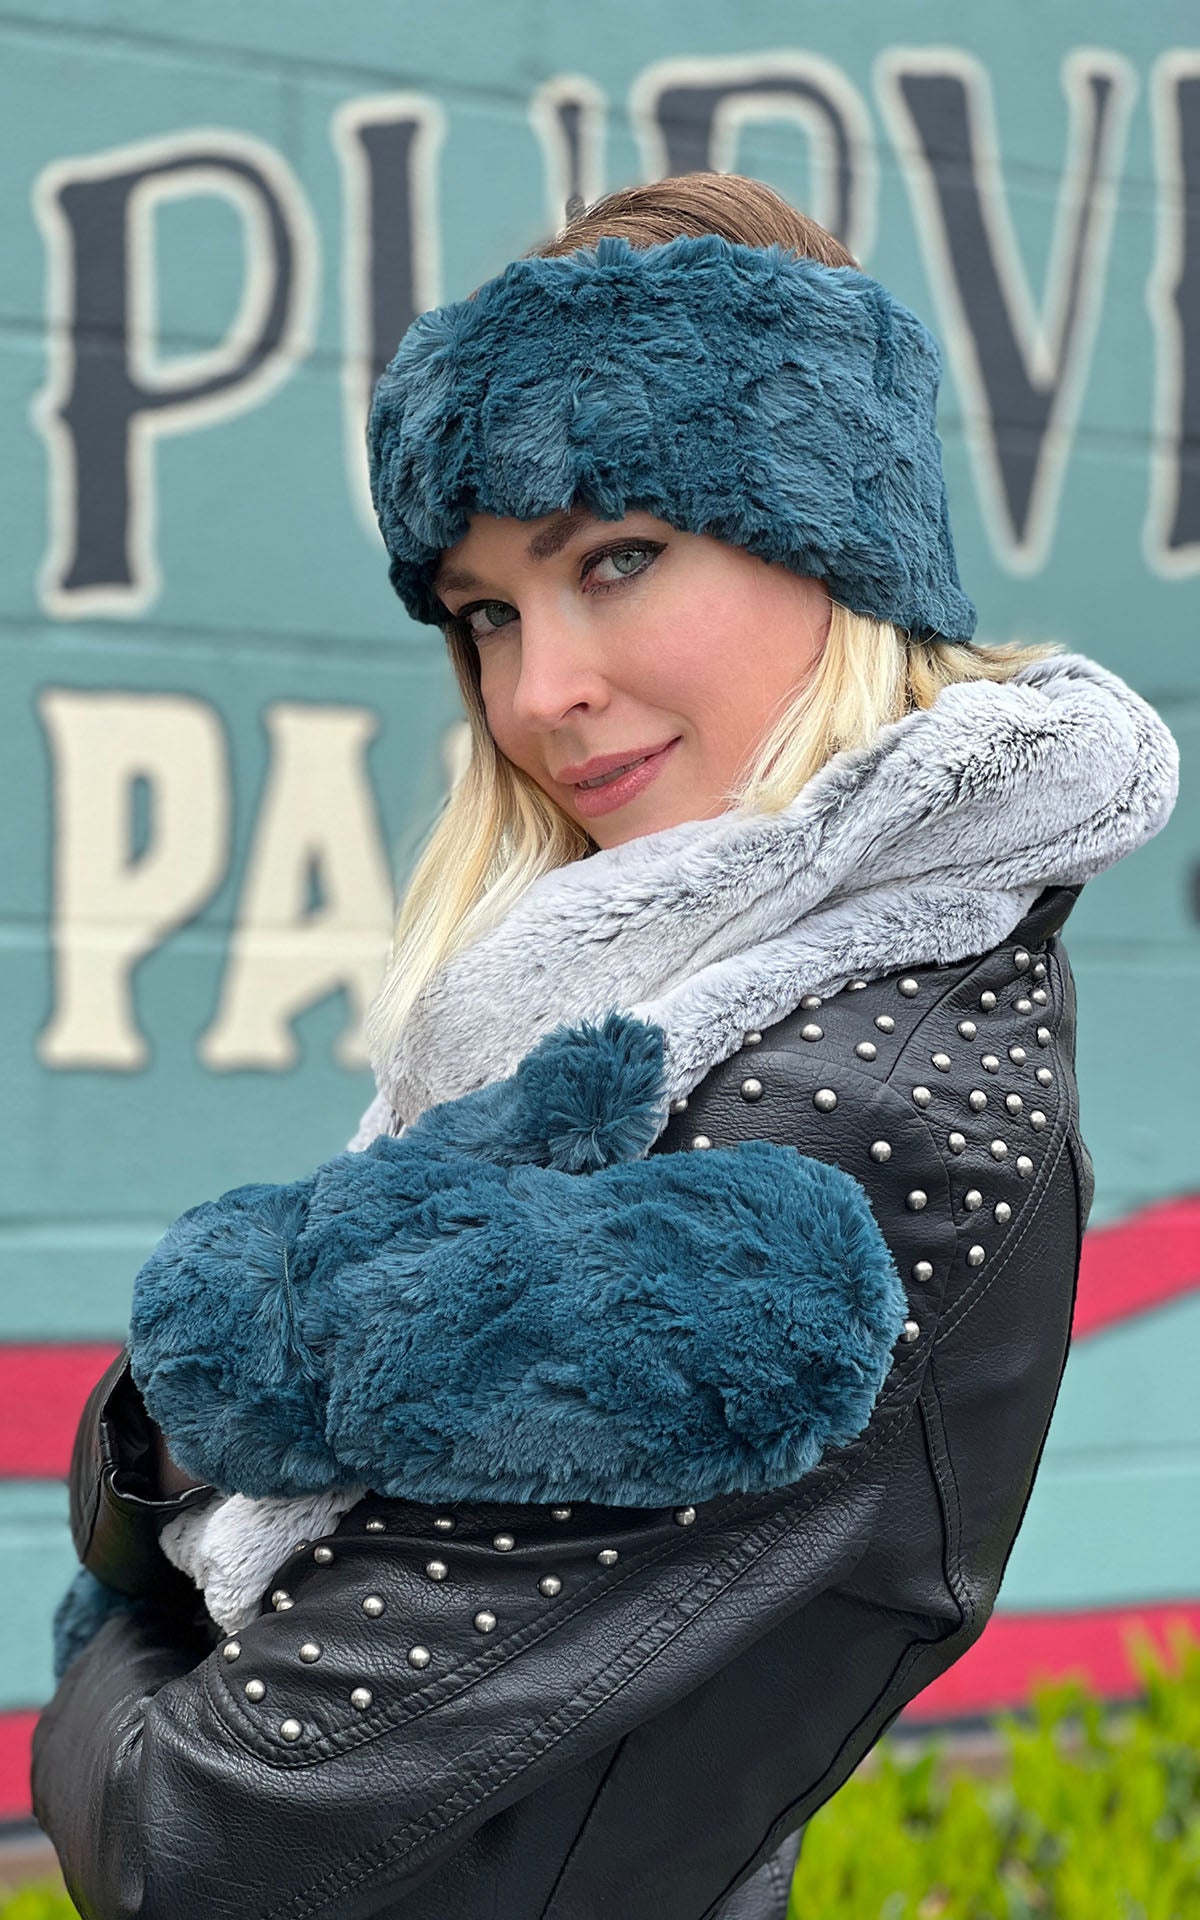 Woman wearing Mitten and Headband on in Peacock Pond Luxury Faux Fur Handmade by Pandemonium Seattle